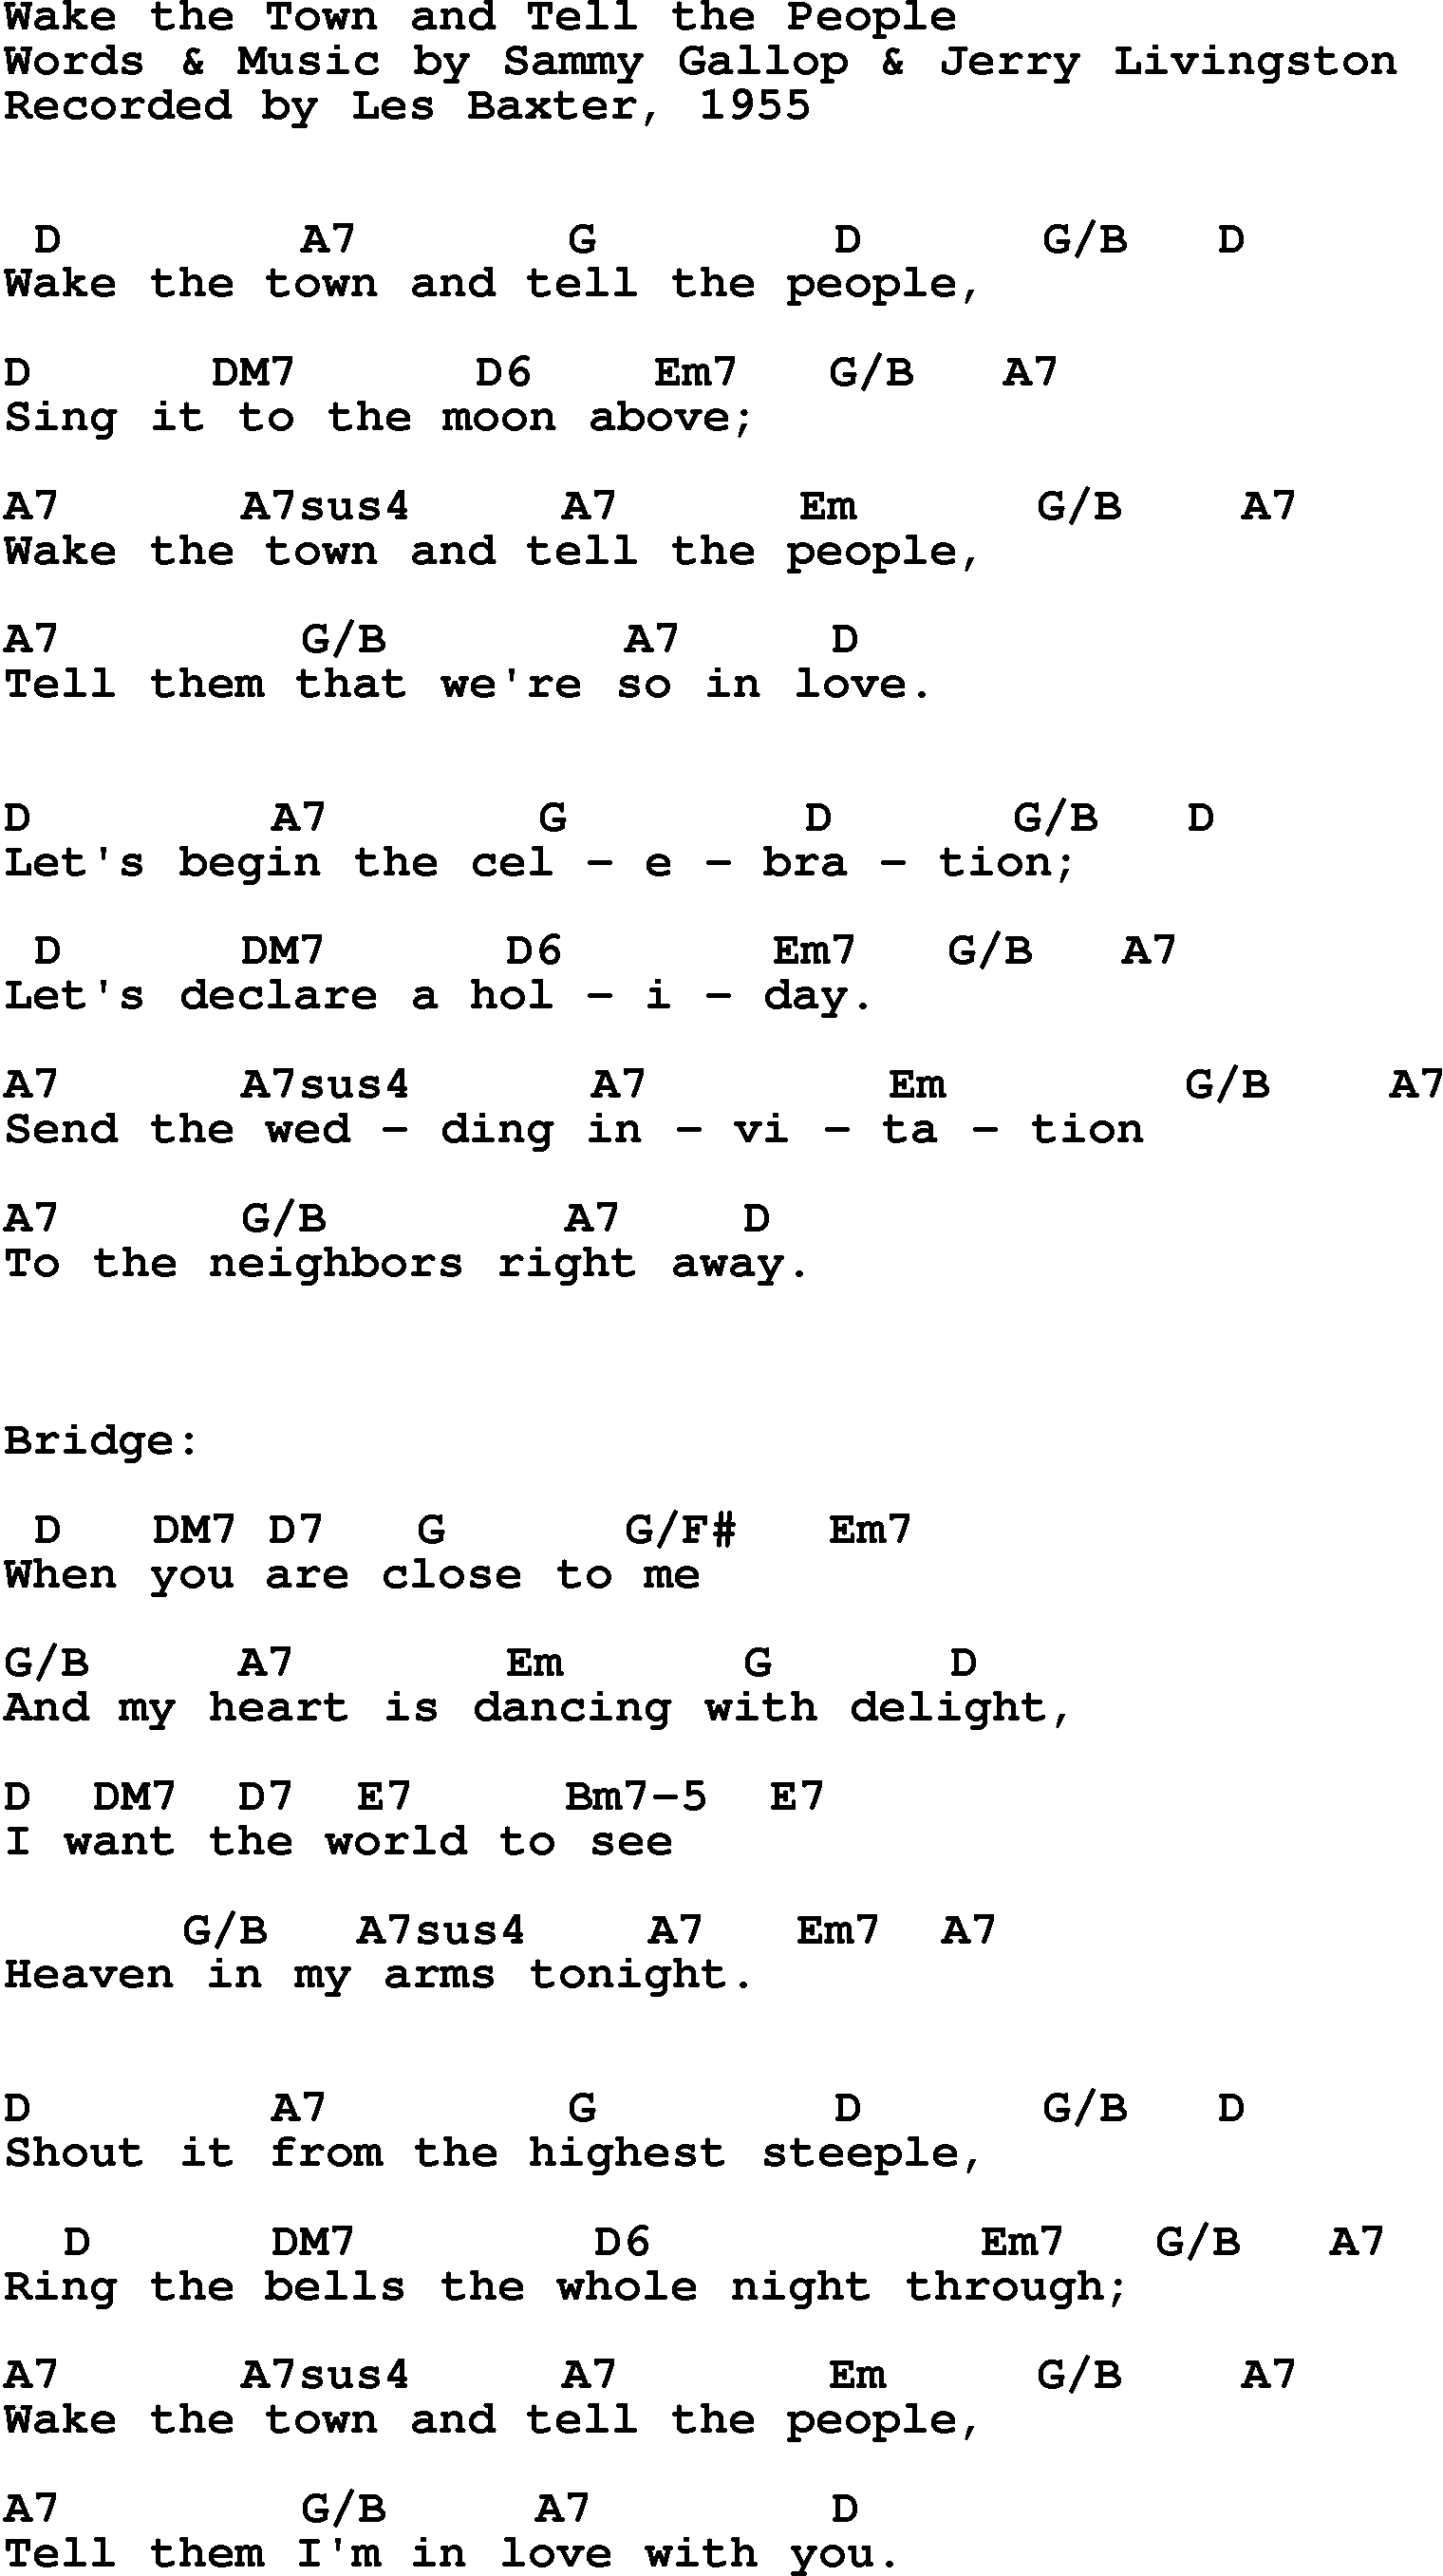 Song Lyrics with guitar chords for Wake The Town And Tell The People - Les Baxter, 1955